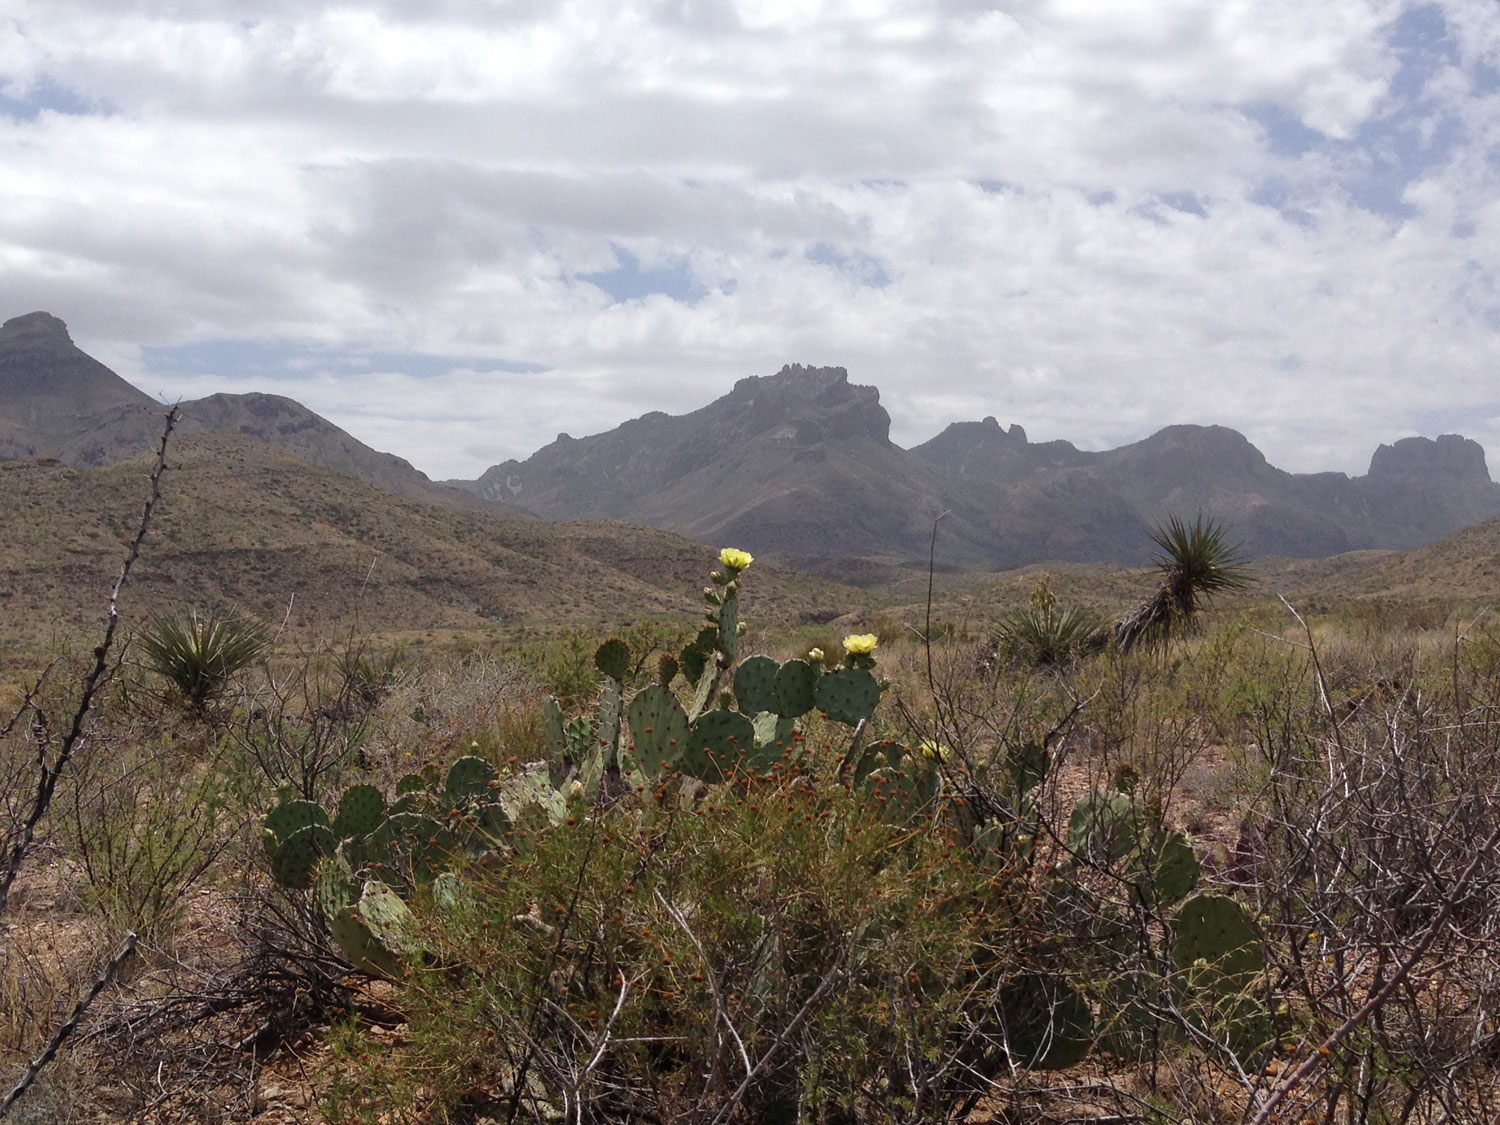 View of the Chisos Mountains with blooming yellow cactus flowers in the foreground as seen from near Panther Junction in Big Bend National Park